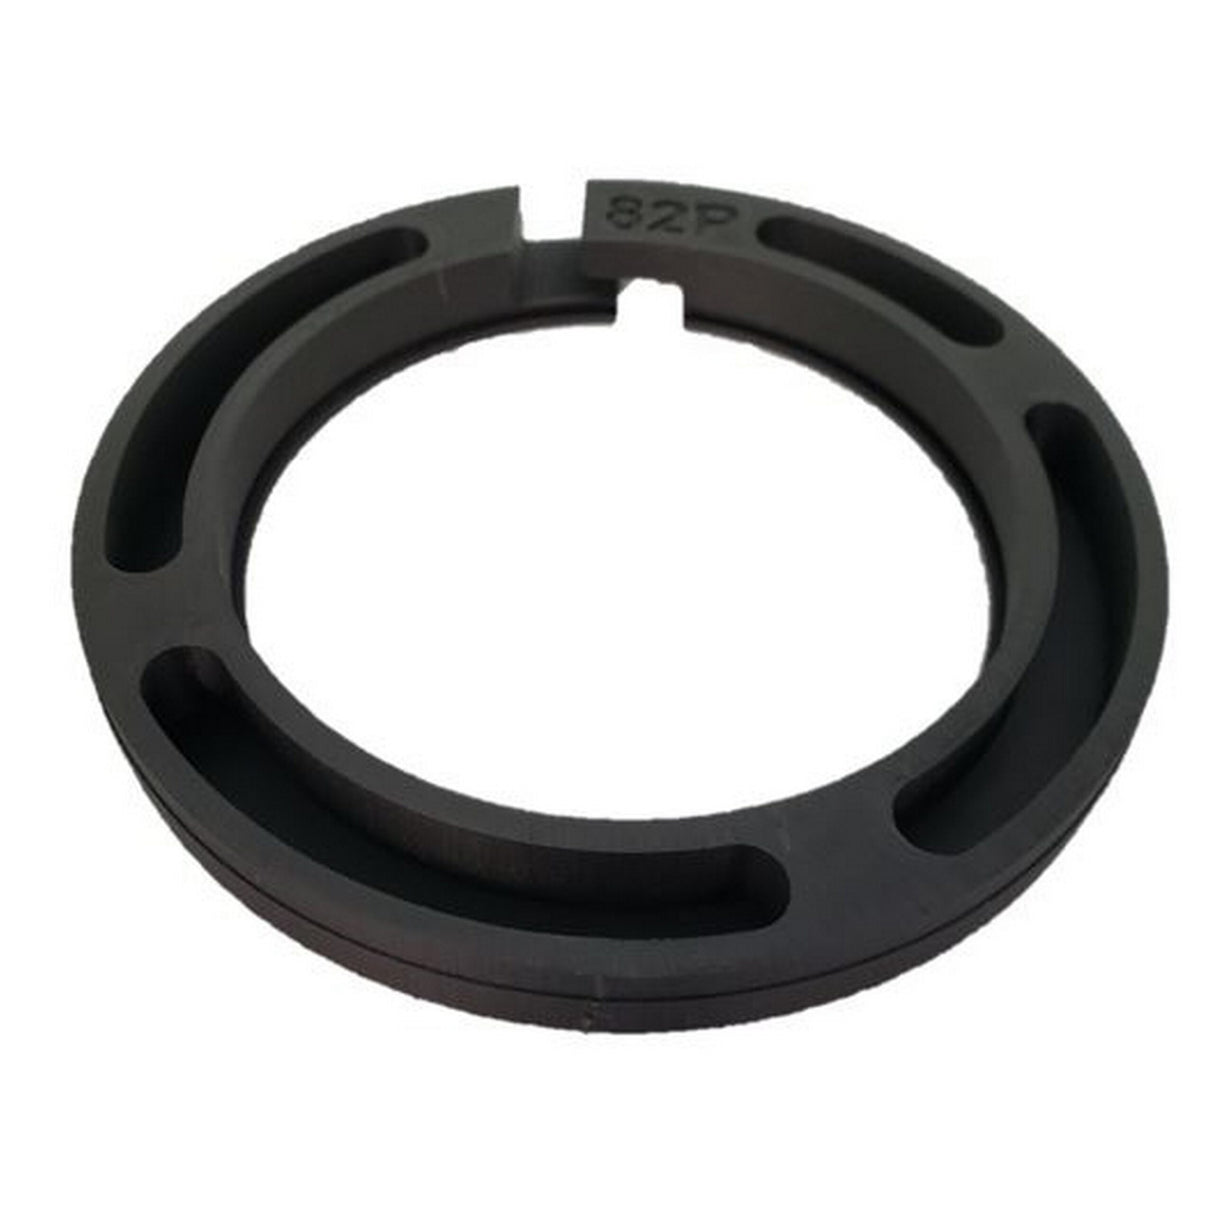 Genustech G-COAR82P Genus Clamp on Adapter Ring, 82mm for GPMB